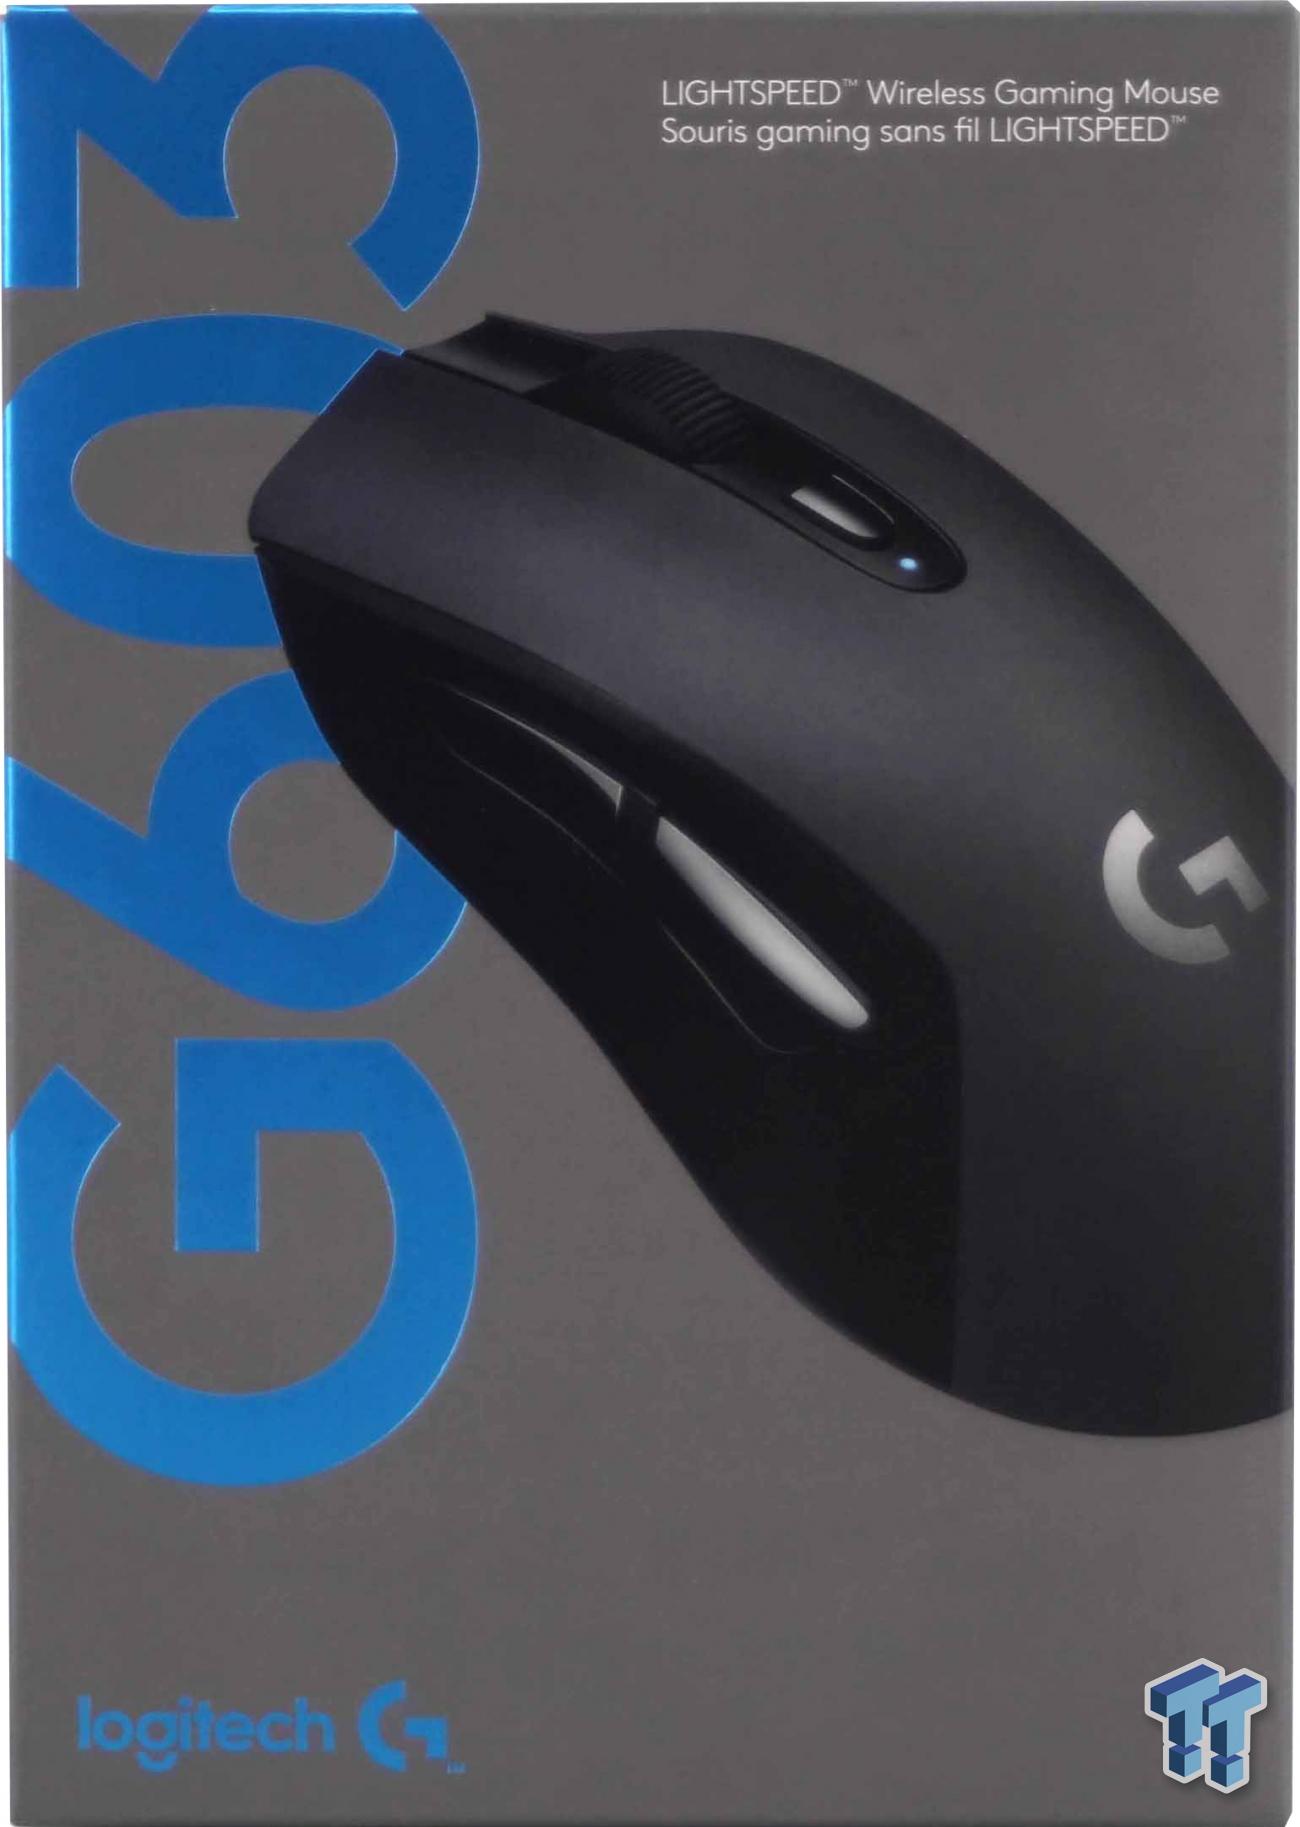 Lav aftensmad der ovre Marco Polo Logitech G603 Lightspeed Wireless Gaming Mouse Review